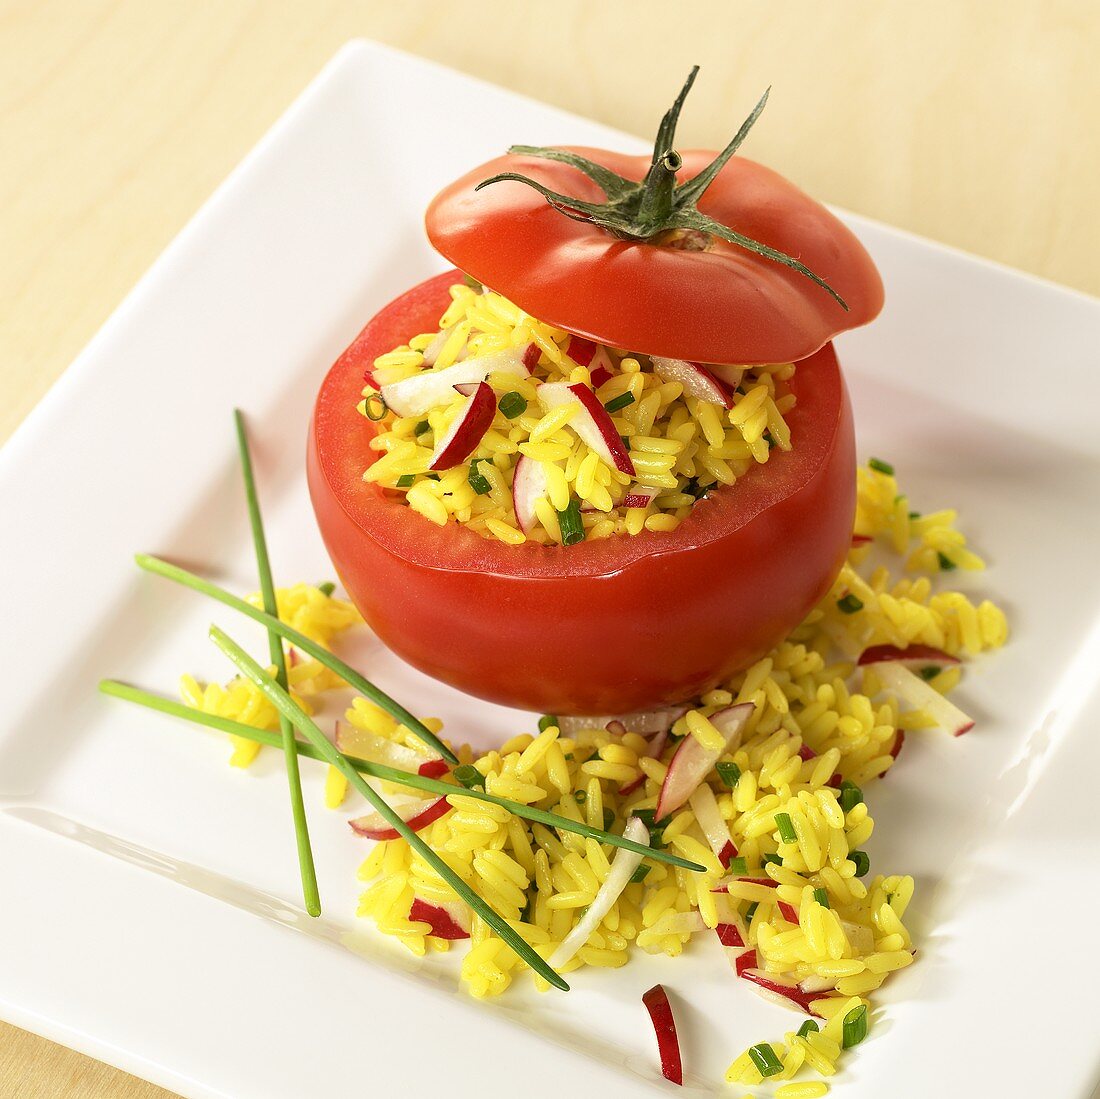 Tomato stuffed with curried rice